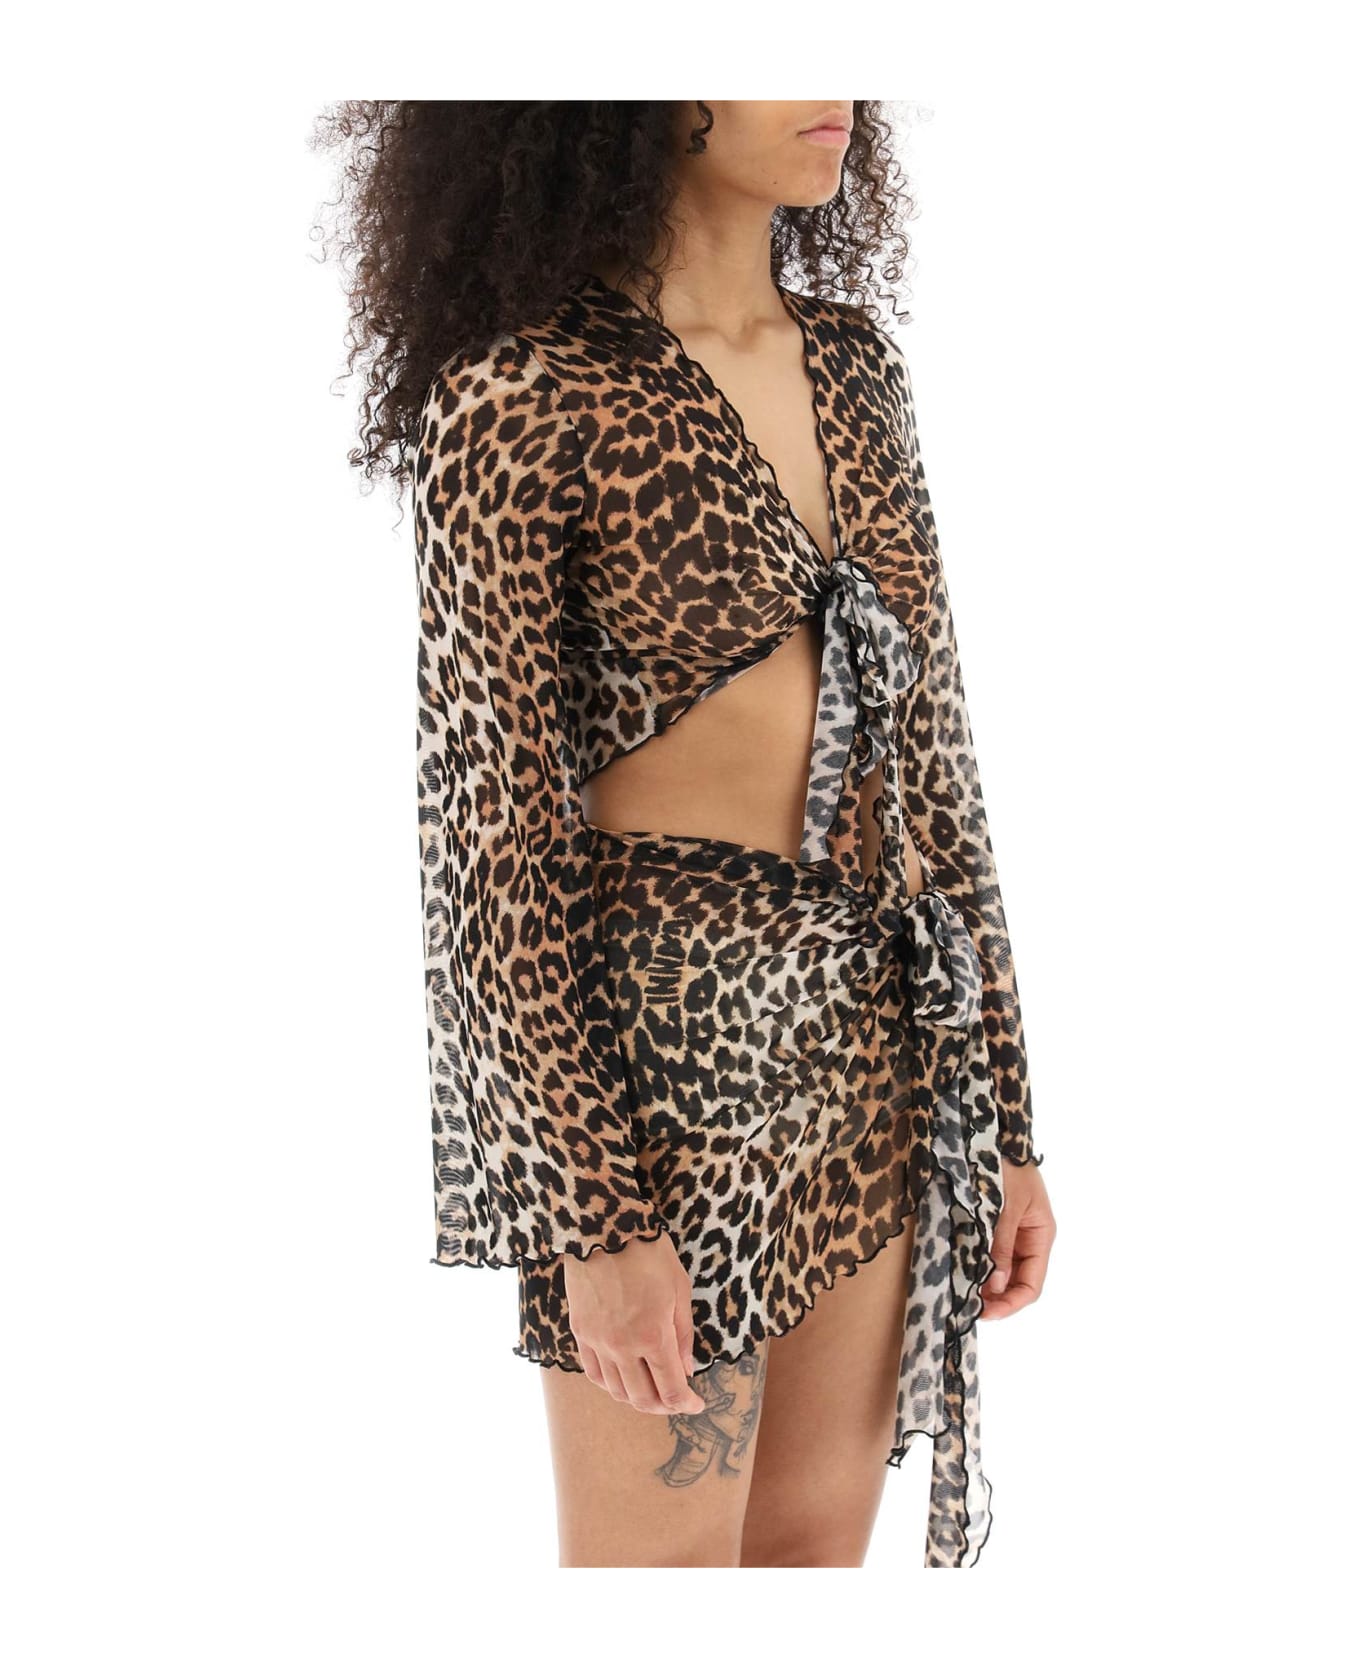 Ganni Cover Up Cropped Top In Mesh With Leopard Print - LEOPARD (Beige)